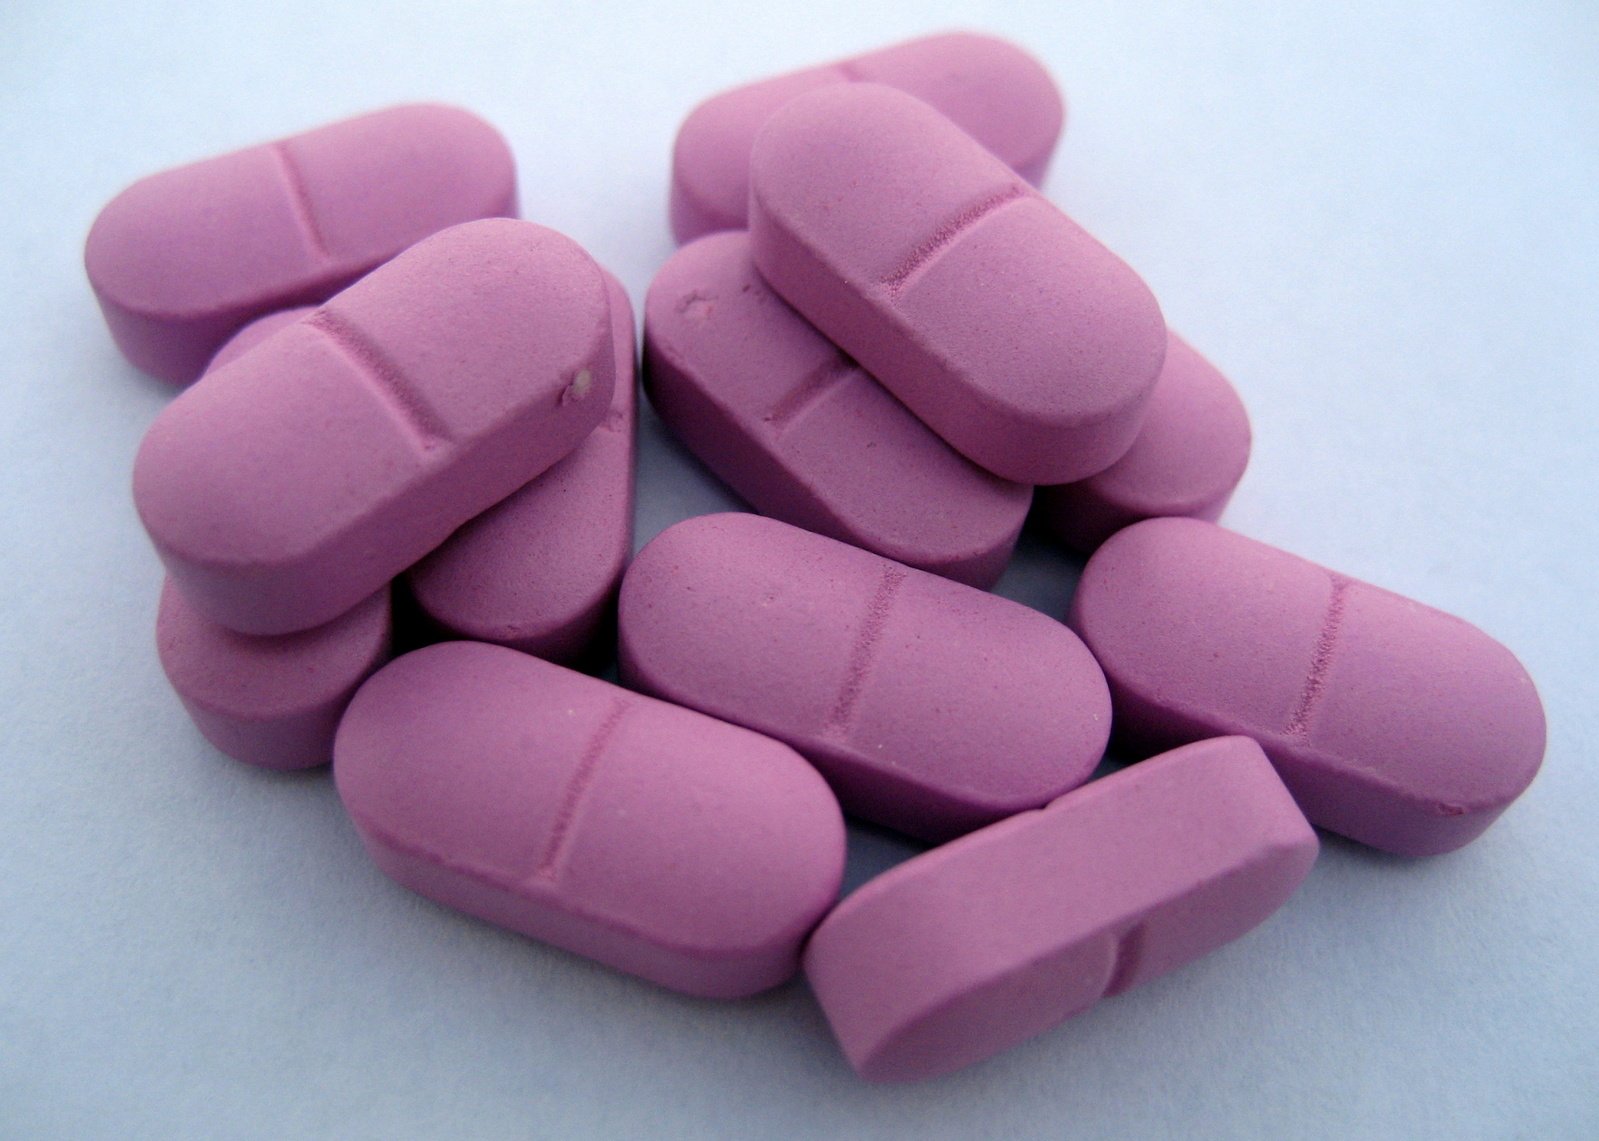 pink pills are shown in this closeup s